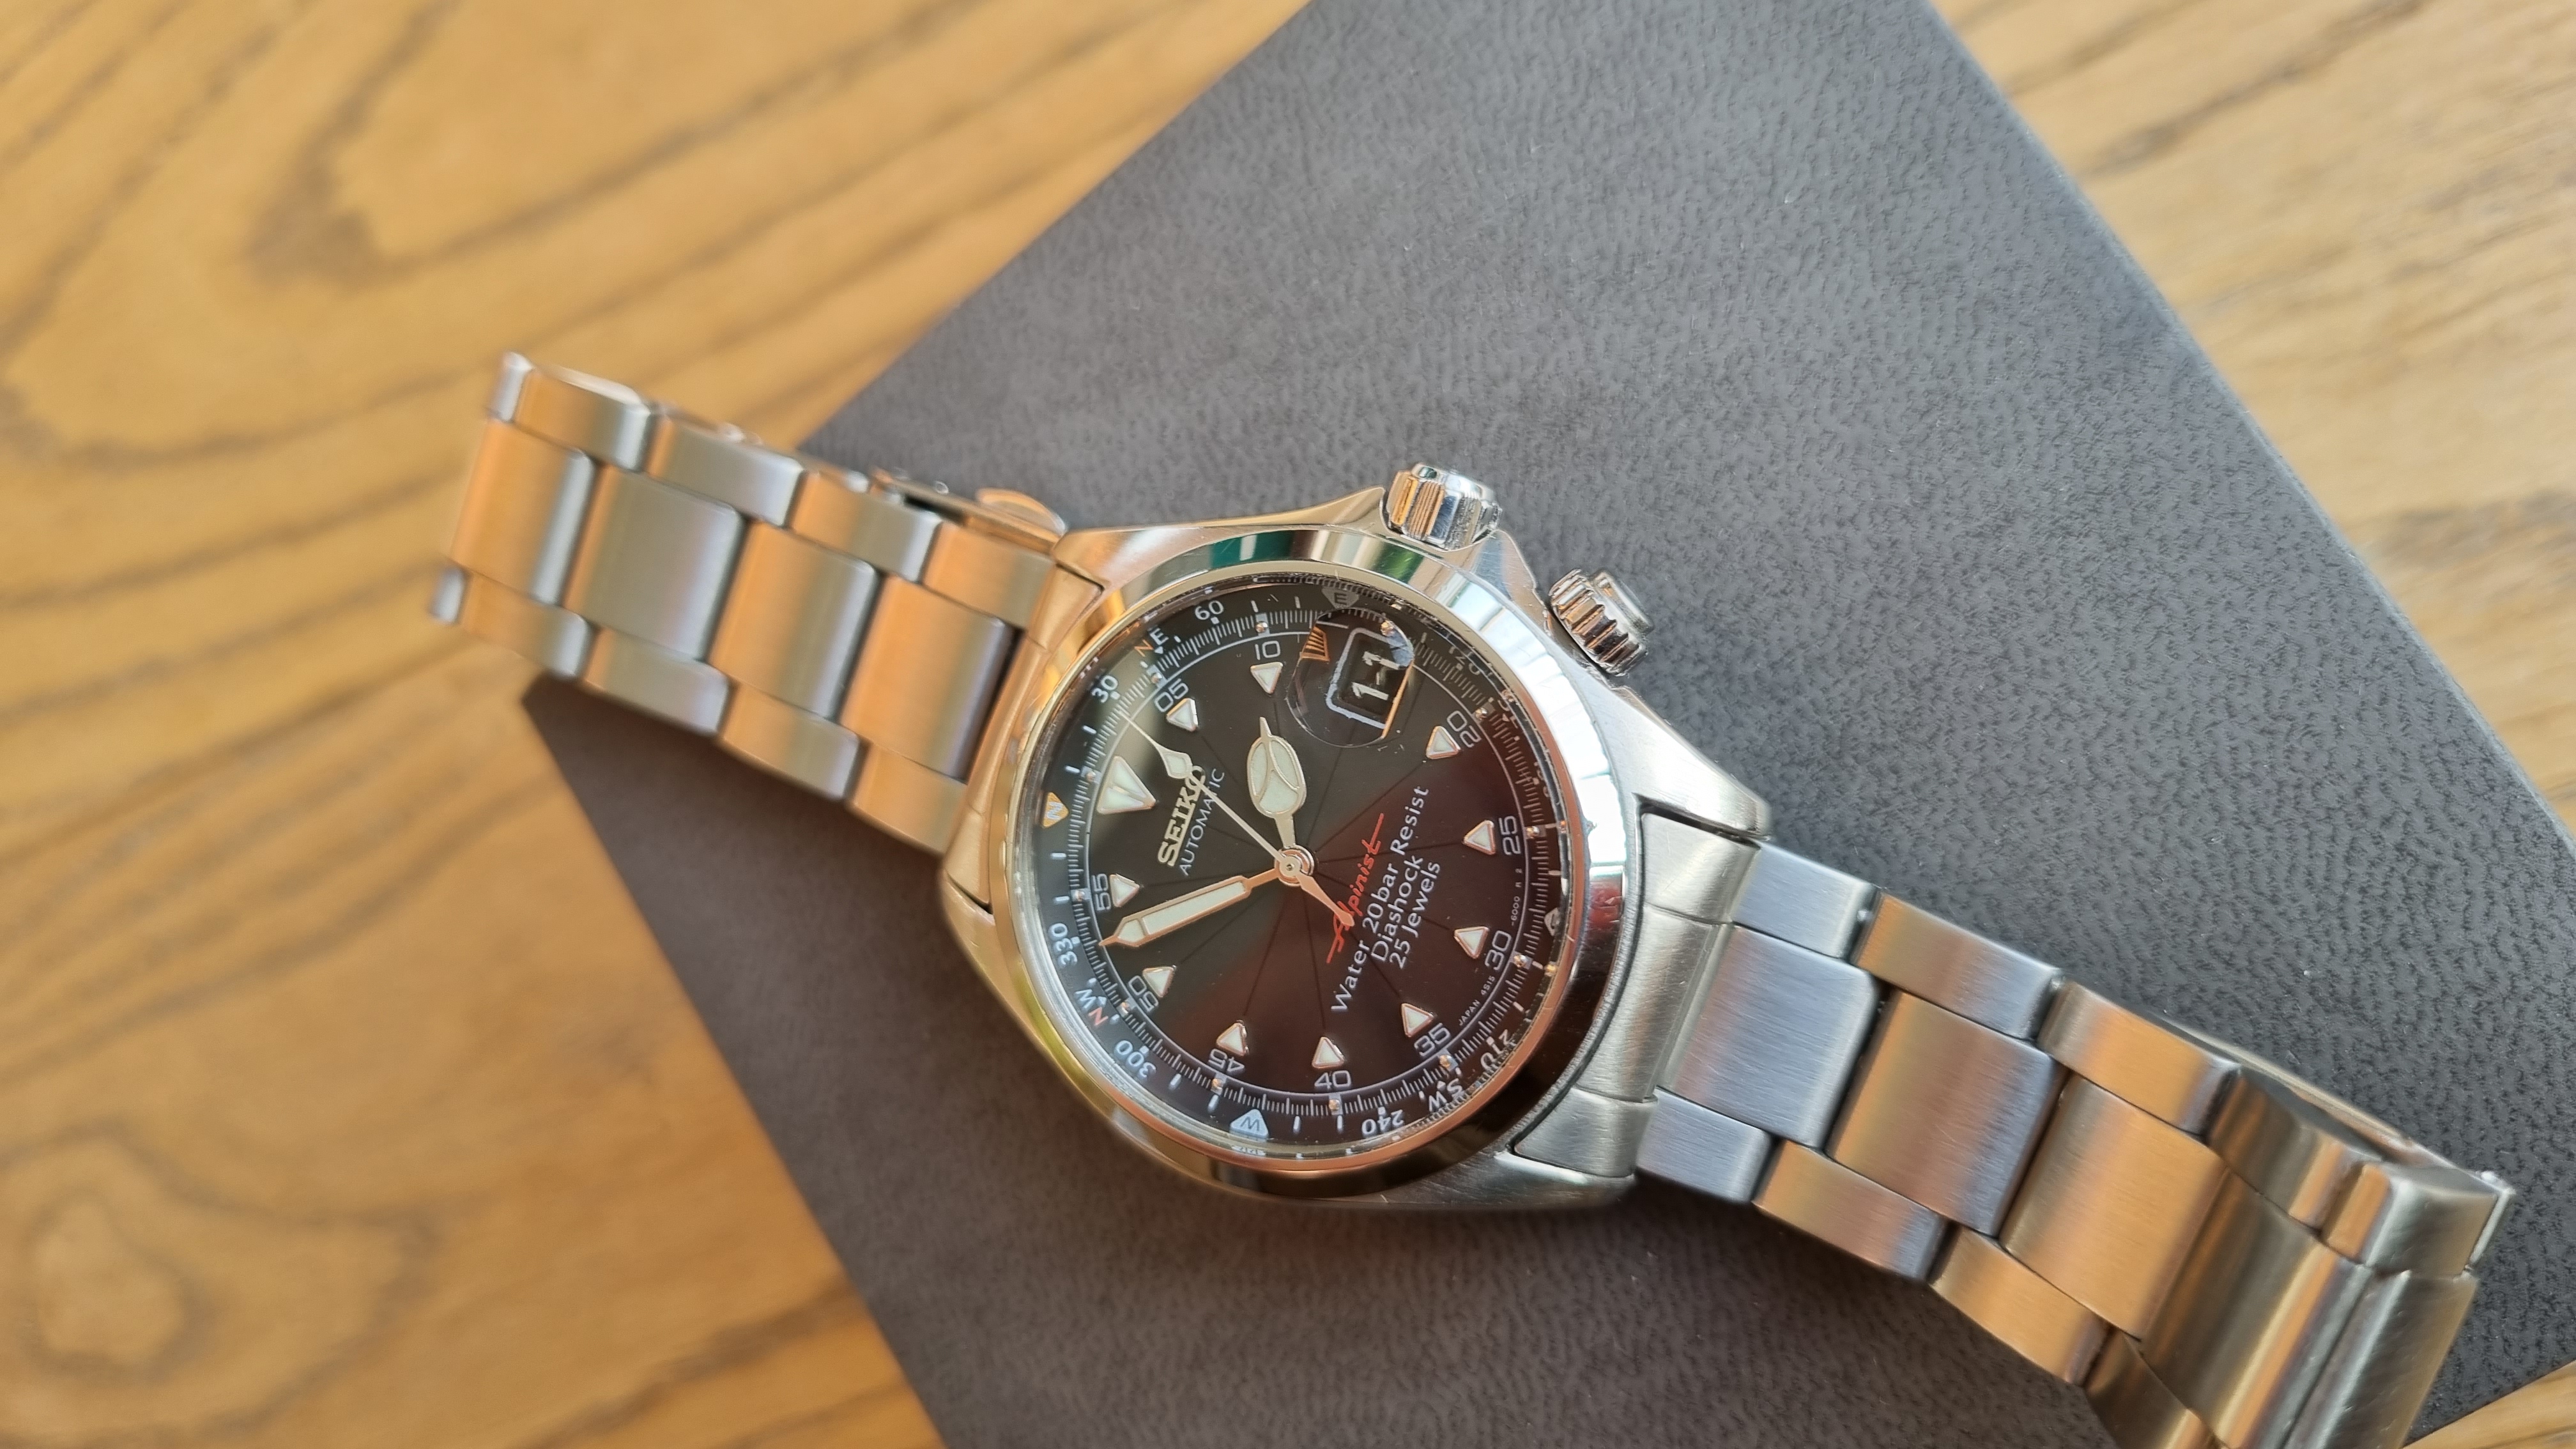 Seiko Red Alpinist SCVF005 4S15 for $999 for sale from a Private